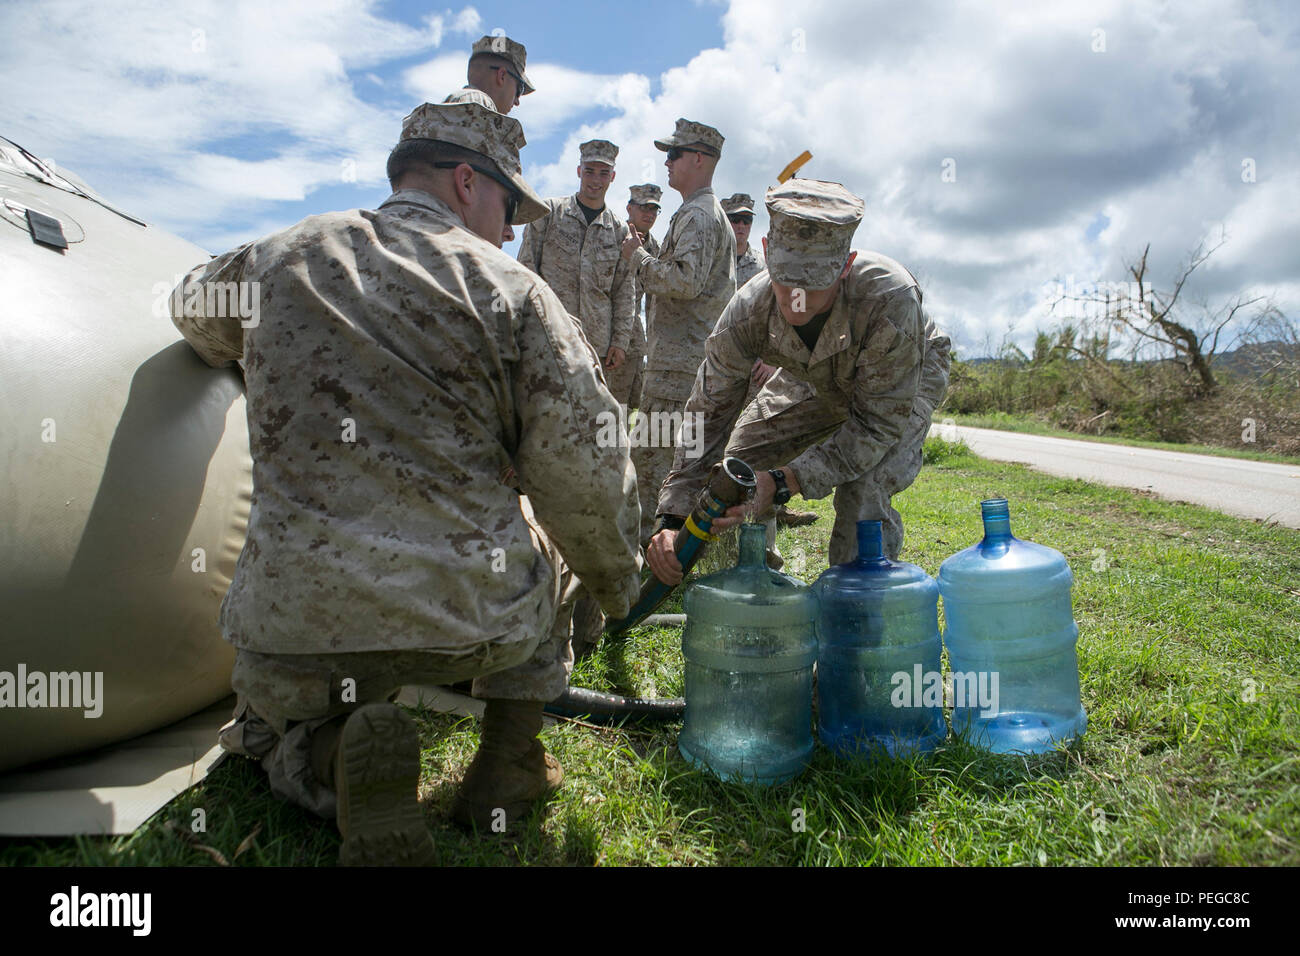 U.S. Marines with Combat Logistics Battalion 31, 31st Marine Expeditionary Unit, distribute water to local civilians as part of typhoon relief efforts in Saipan, Aug. 11, 2015. The 31st MEU and the ships of the Bonhomme Richard Amphibious Ready Group are assisting the Federal Emergency Management Agency with distributing emergency relief supplies to Saipan after the island was struck by Typhoon Soudelor, Aug. 2-3. (U.S. Marine Corps photo by Lance Cpl. Brian Bekkala/Released.) Stock Photo